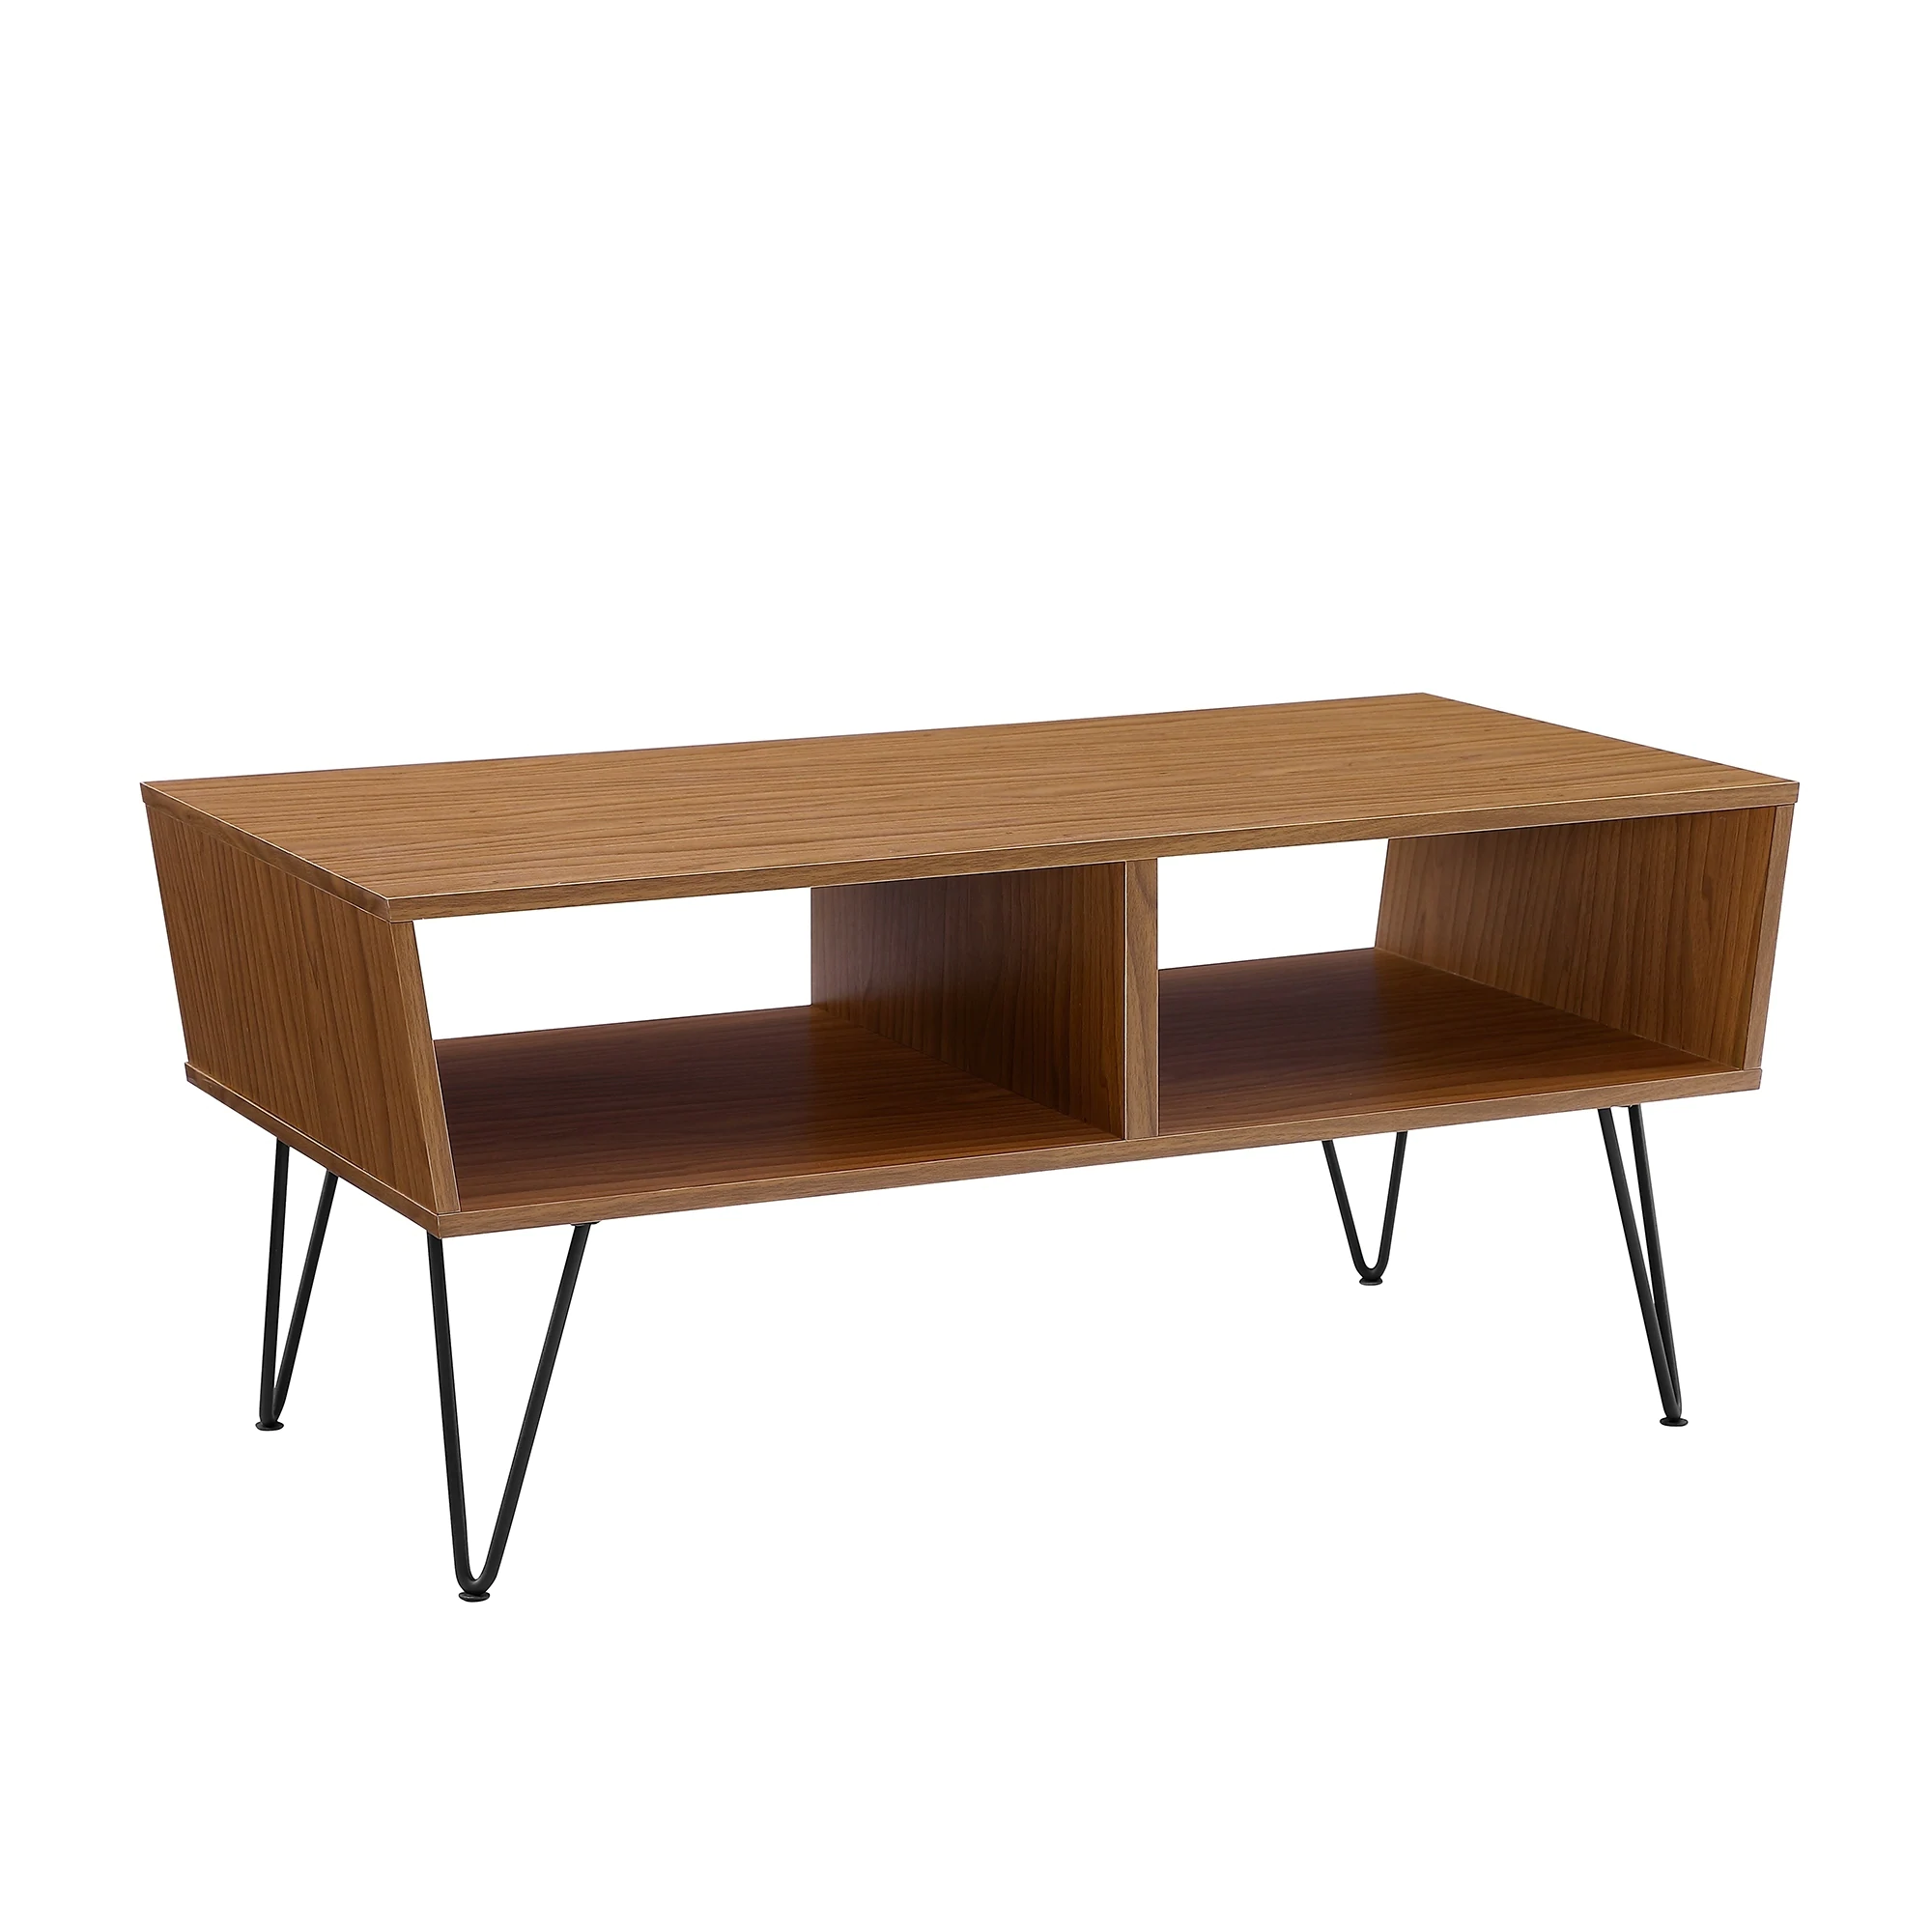 mid century angled coffee table with hairpin legs modern round accent screw free shipping today floor threshold transitions beach lamp dining room outdoor drink oak sofa sectional